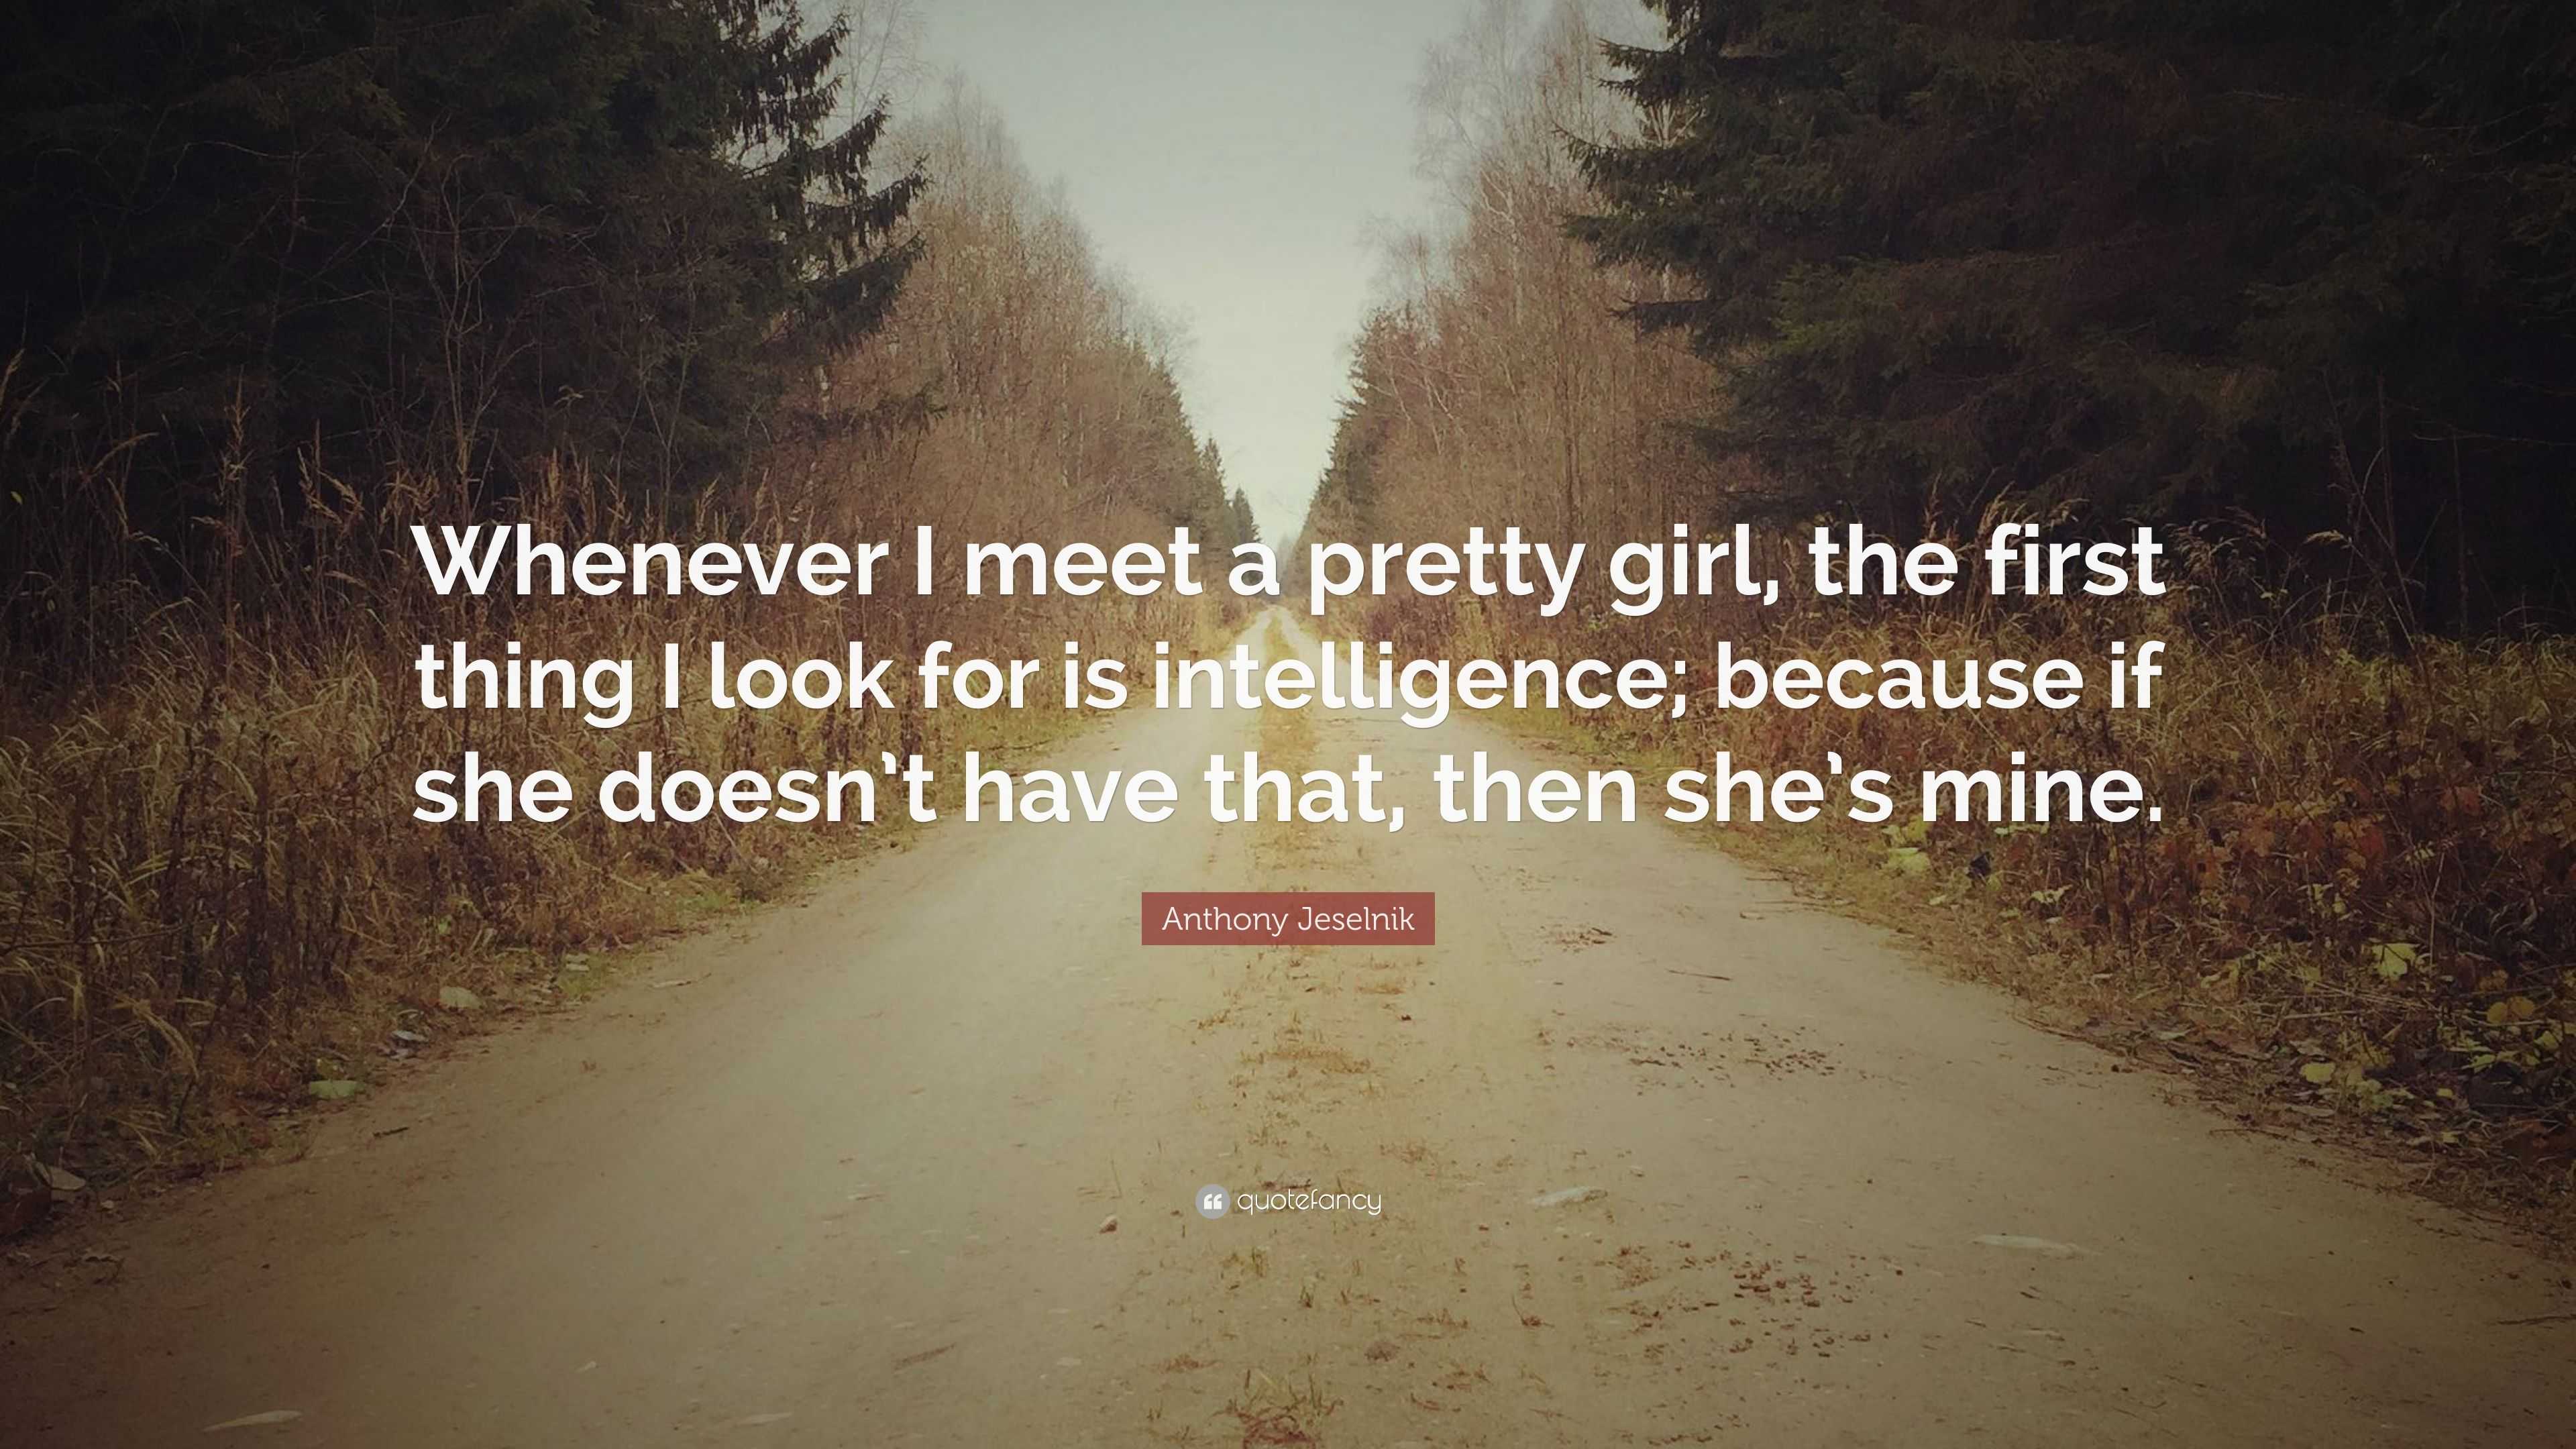 https://quotefancy.com/media/wallpaper/3840x2160/5066833-Anthony-Jeselnik-Quote-Whenever-I-meet-a-pretty-girl-the-first.jpg